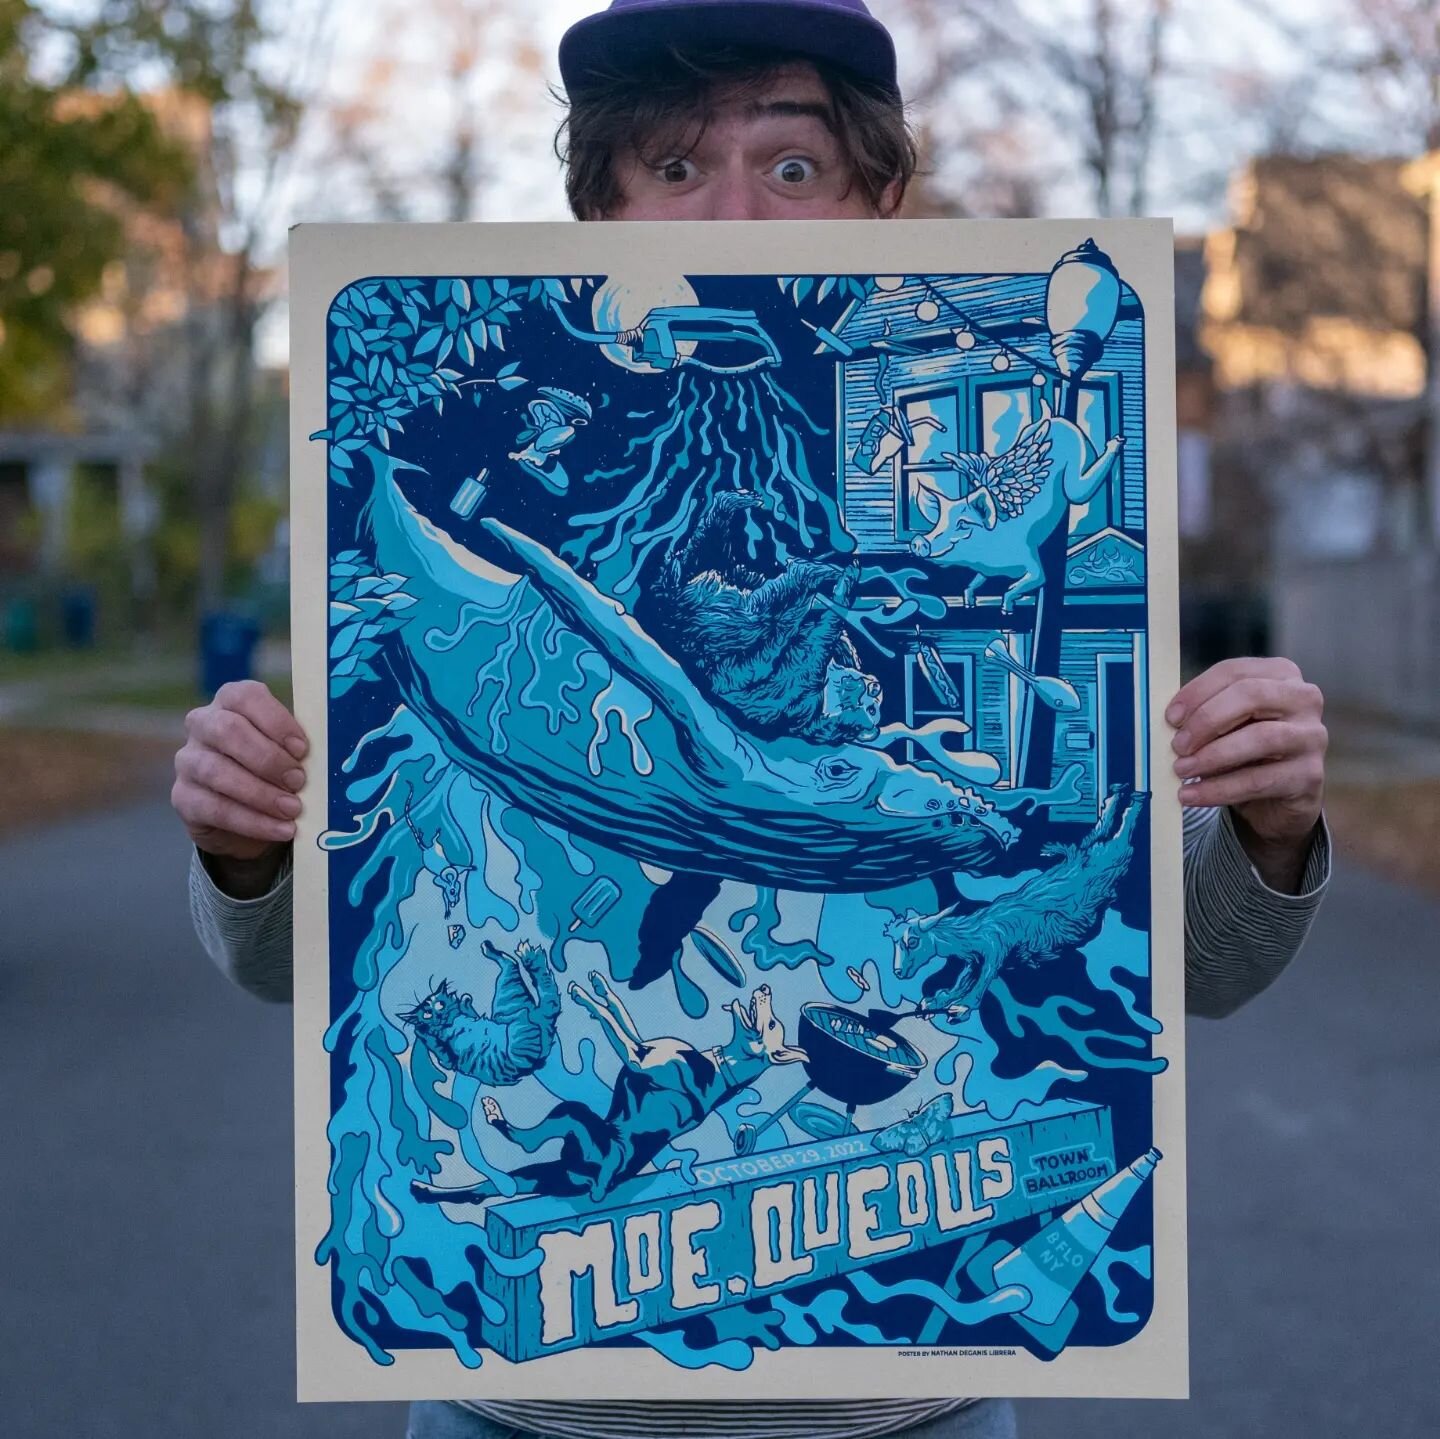 Peekaboo! 😛 So honored to have made the poster for the great @moetheband and @aqueousband otherwise known as MOE.QUEOUS! 
.
Theme of this print was a buffalo block party and boi-o-boy do i miss a good block party.. summer hangs, streets closed with 